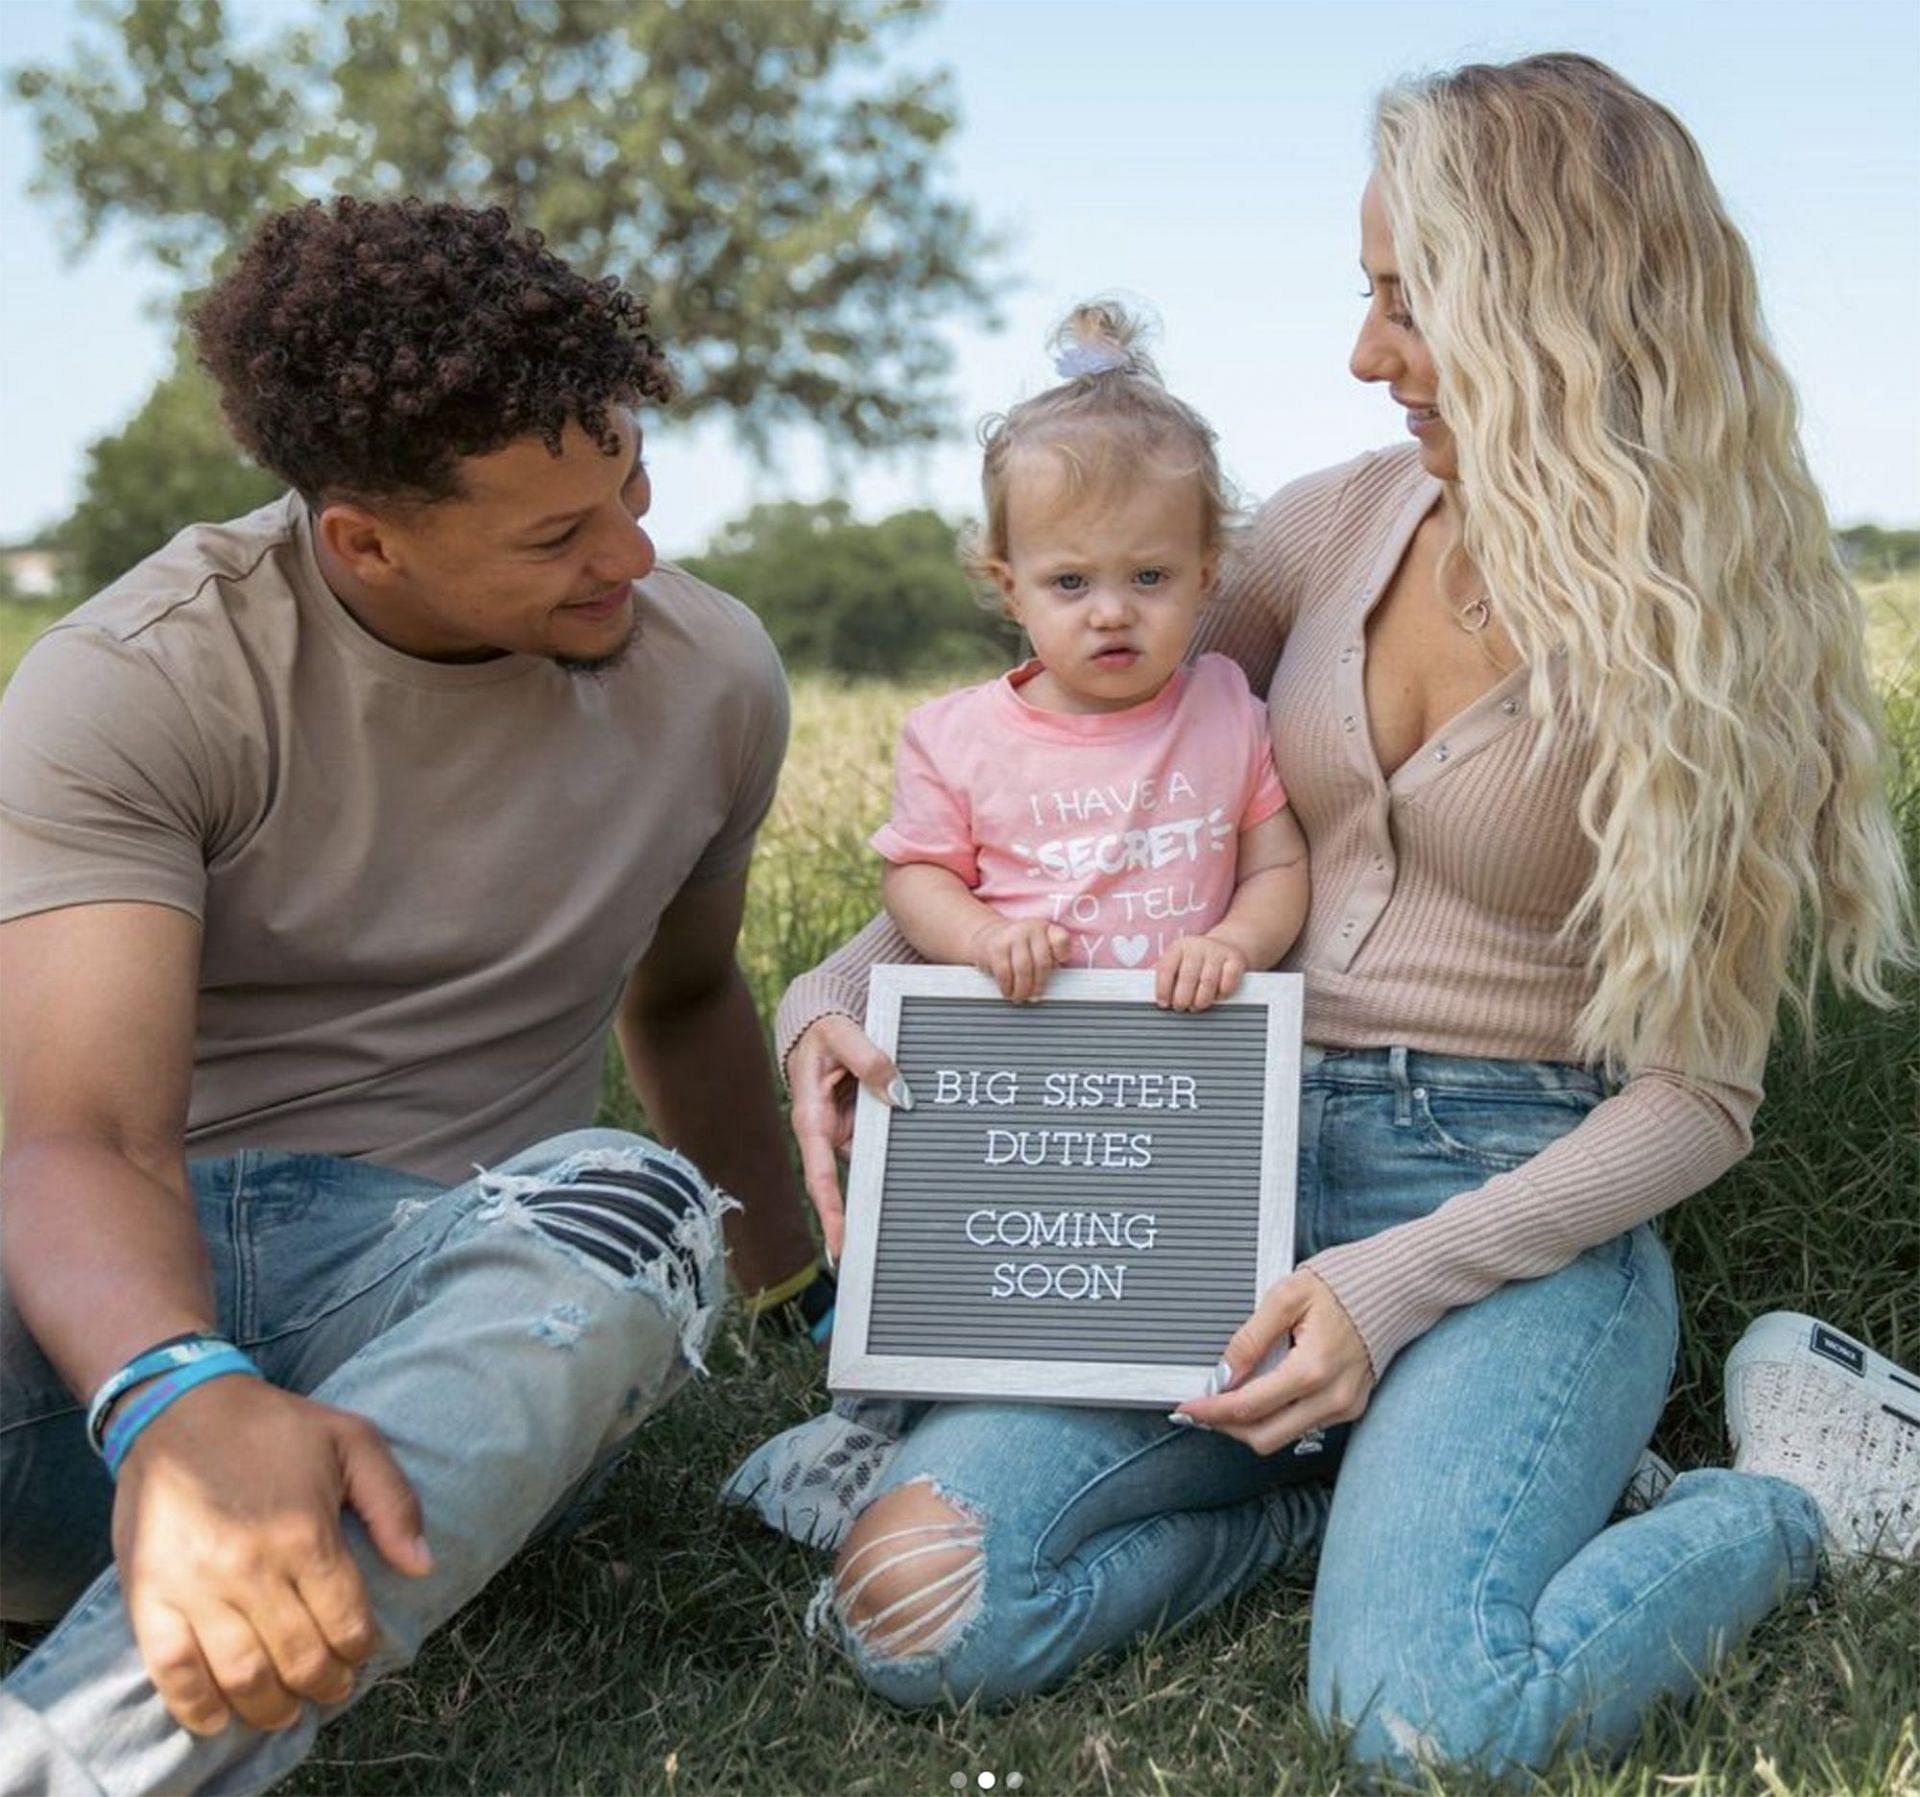 Patrick and Brittany Mahomes | Instagram